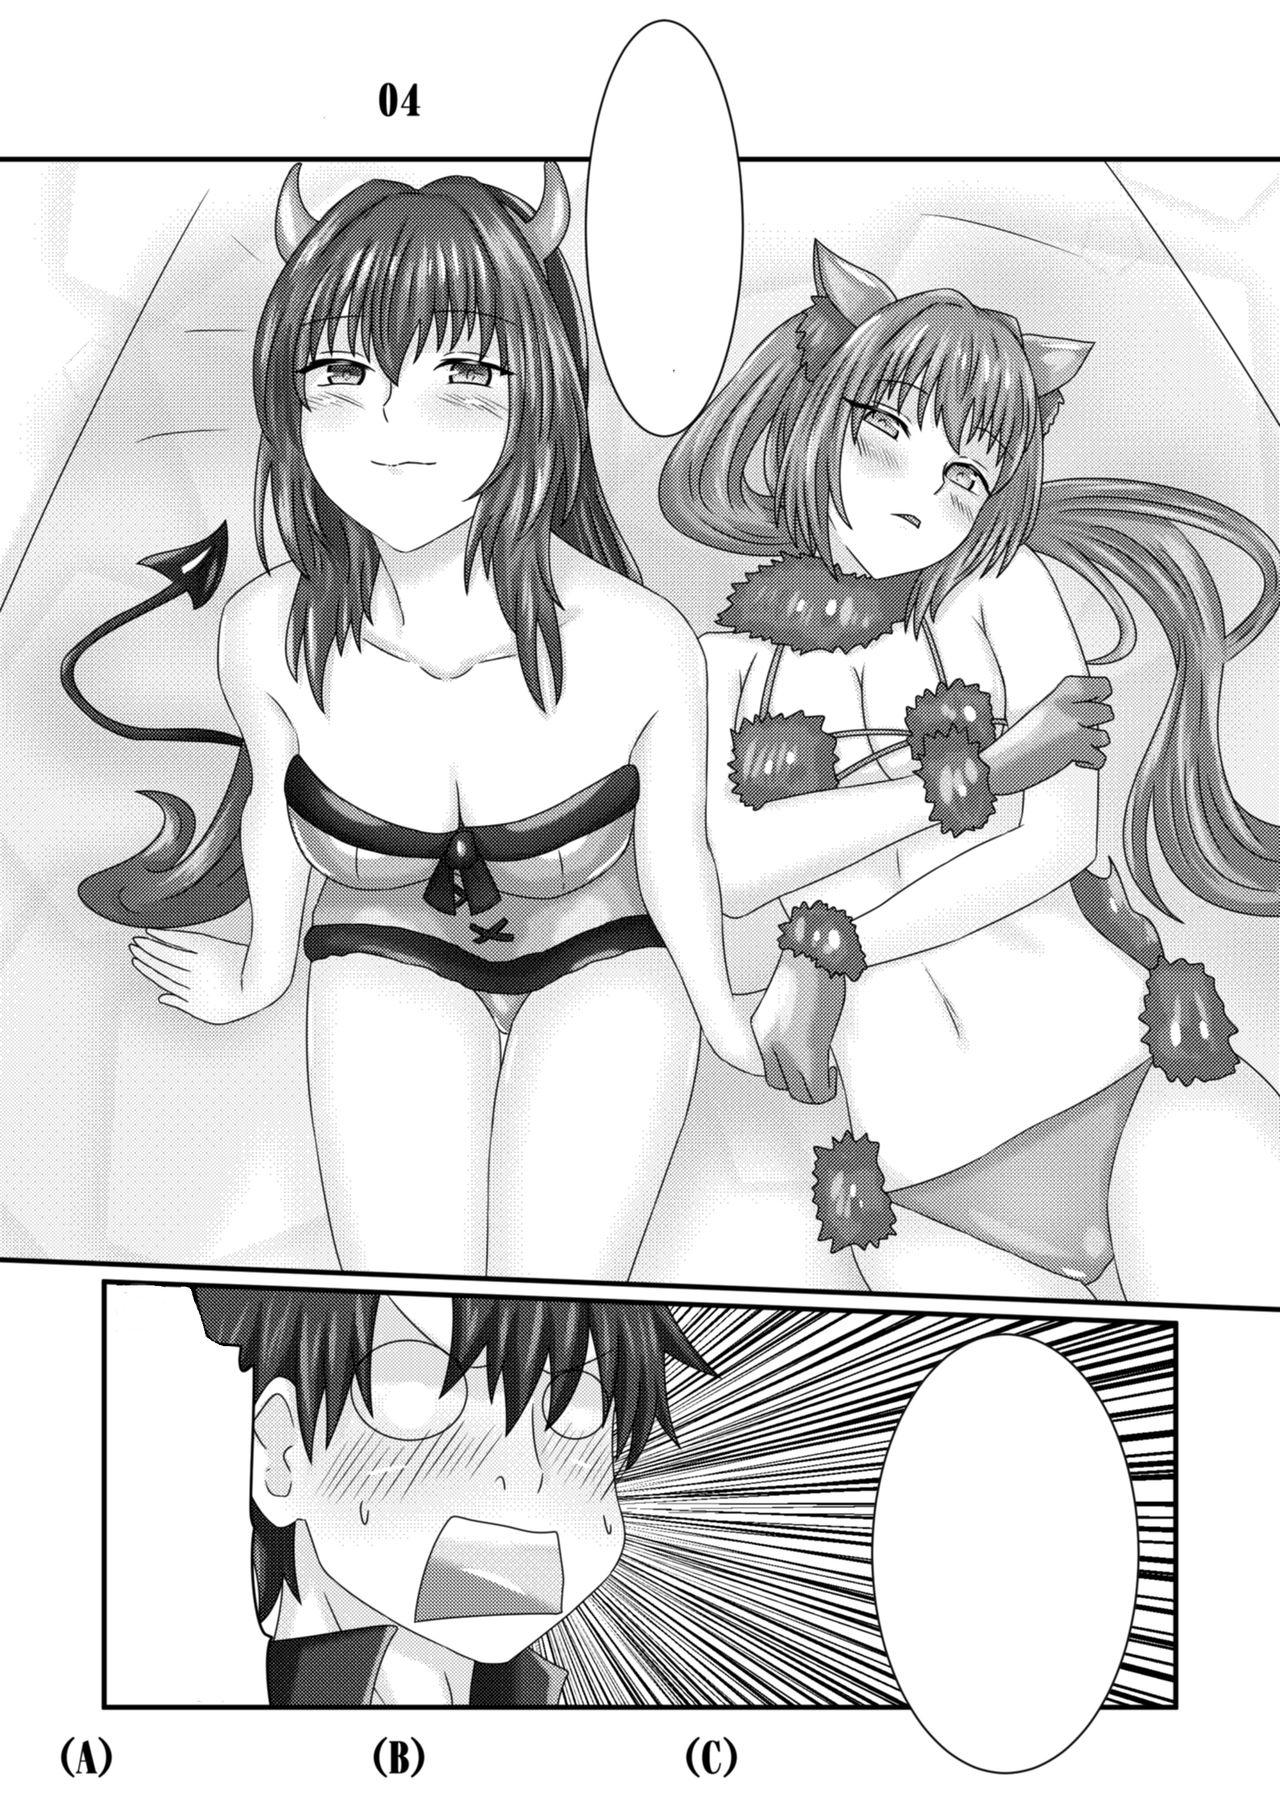 Scathach no Halloween 4